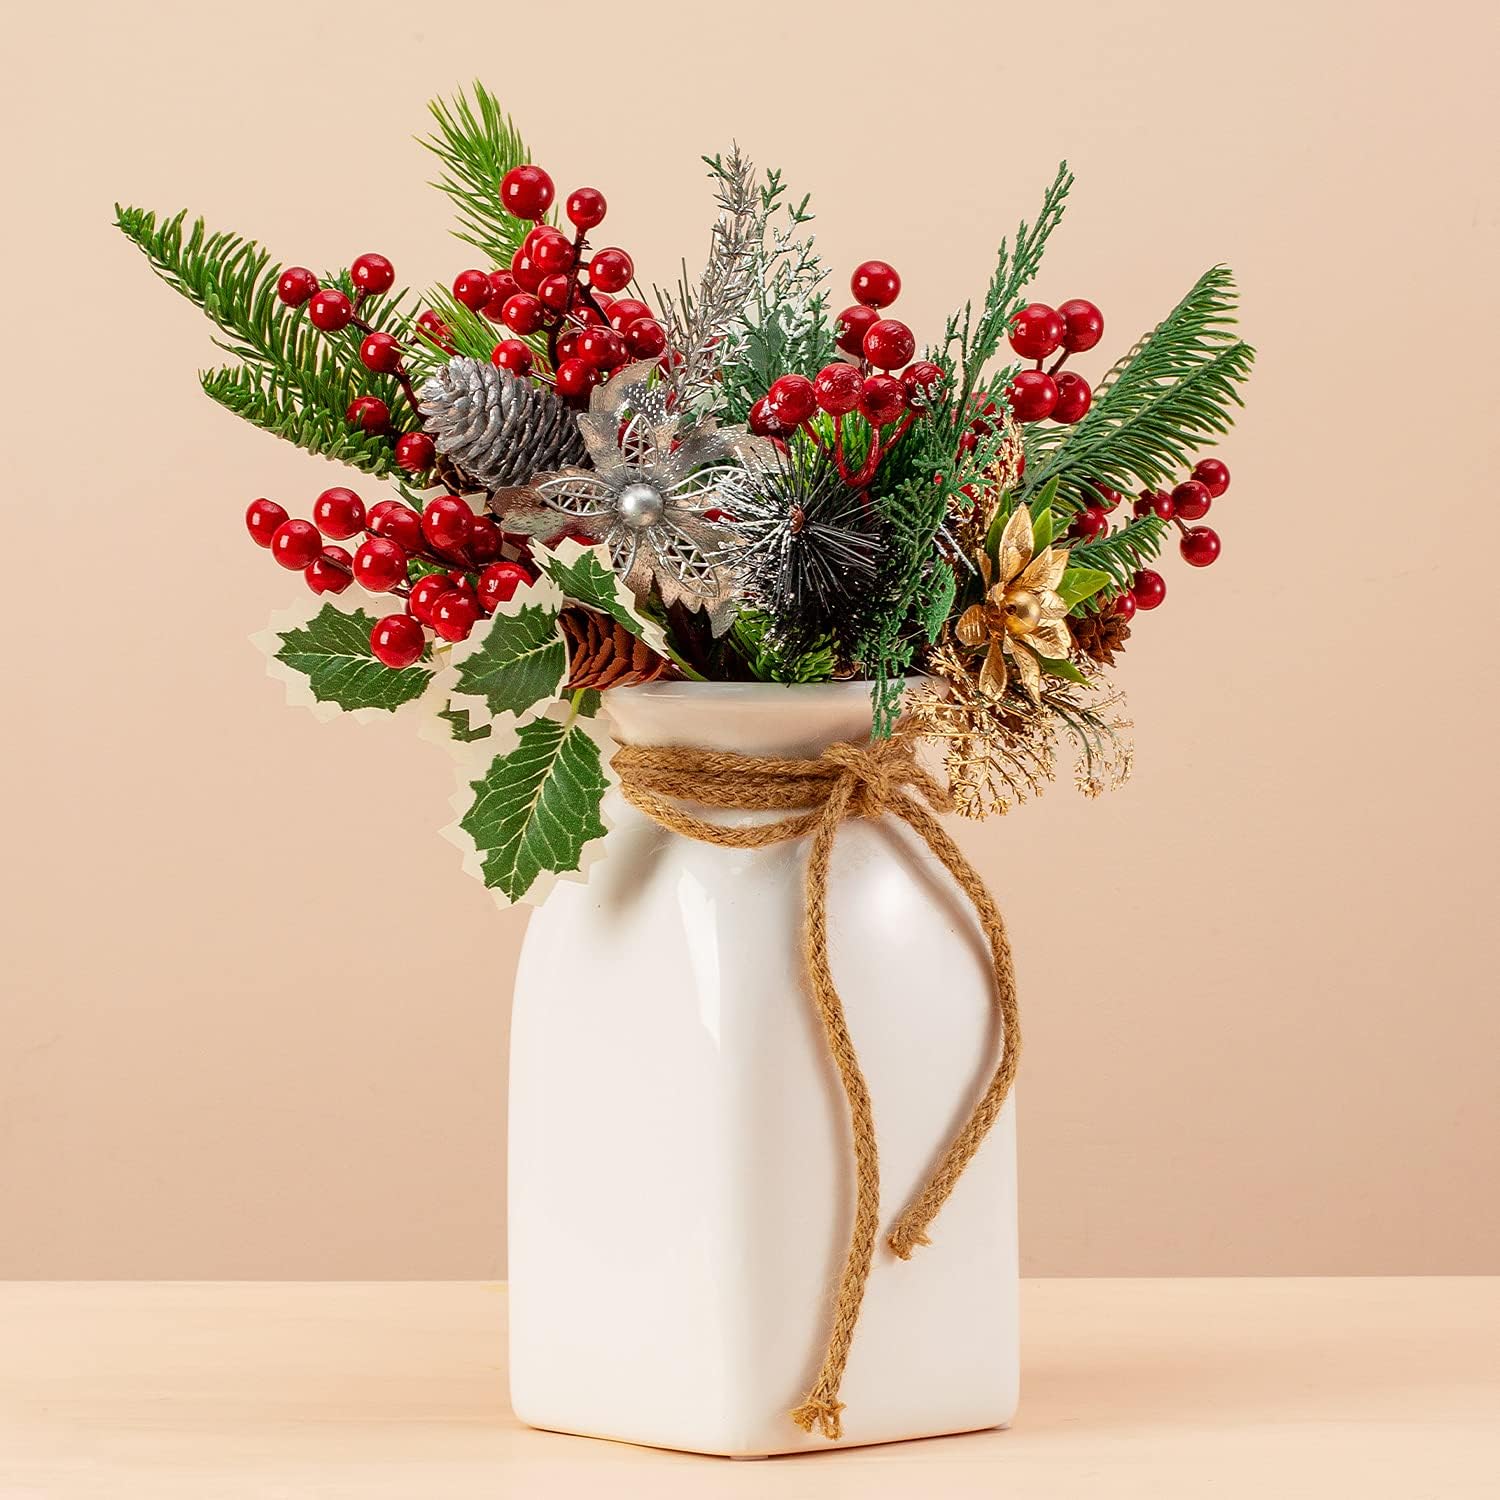 Mini Pine Berry Picks: 10cm Artificial Pinecones & Berries, Christmas Decor  Flowers For Festive Parties From Dhhonton, $1.21